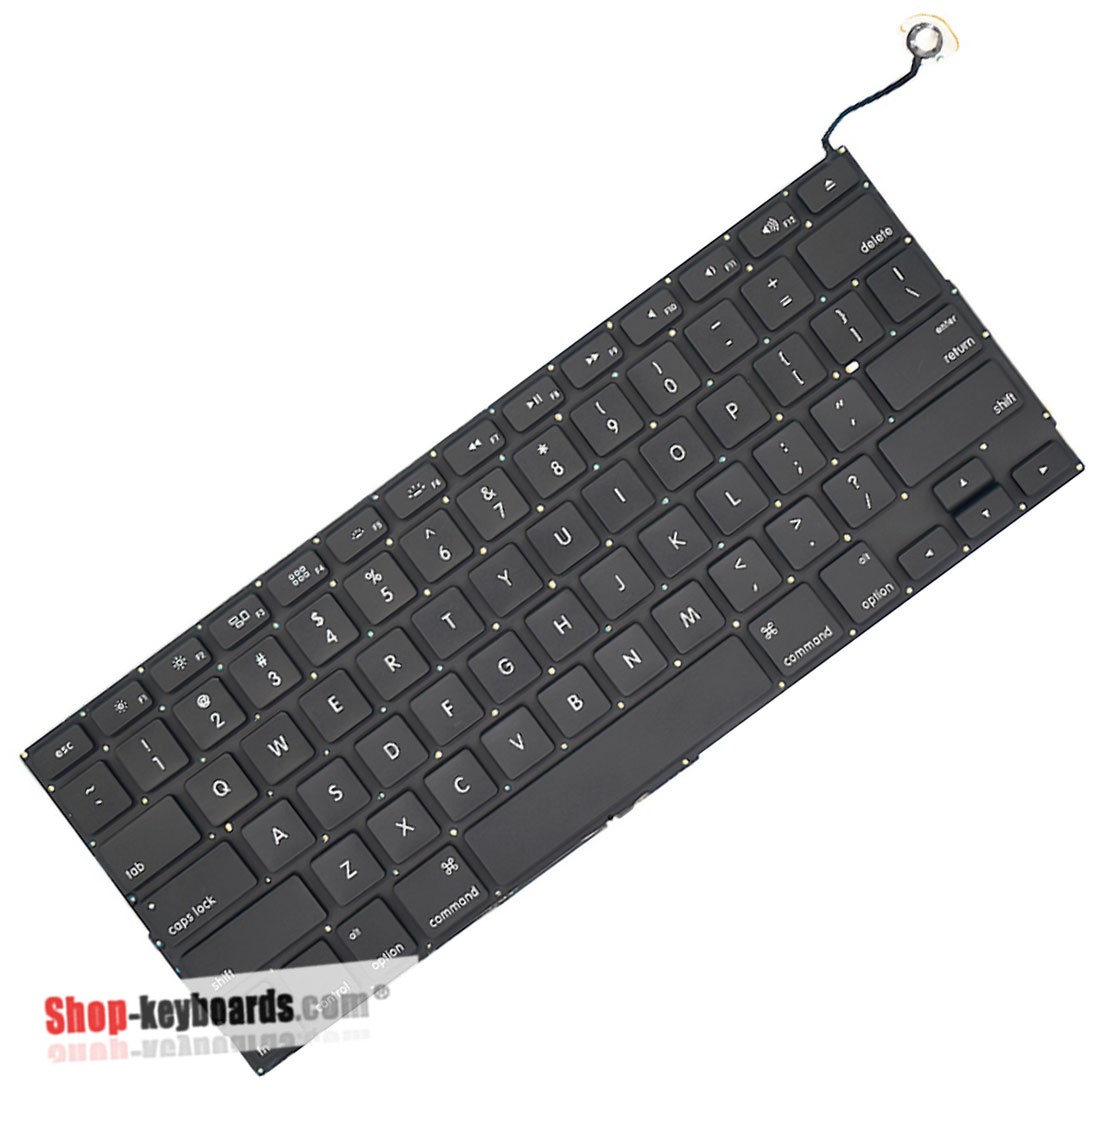 Apple Macbook Pro Unibody 15 inch MB985 Keyboard replacement